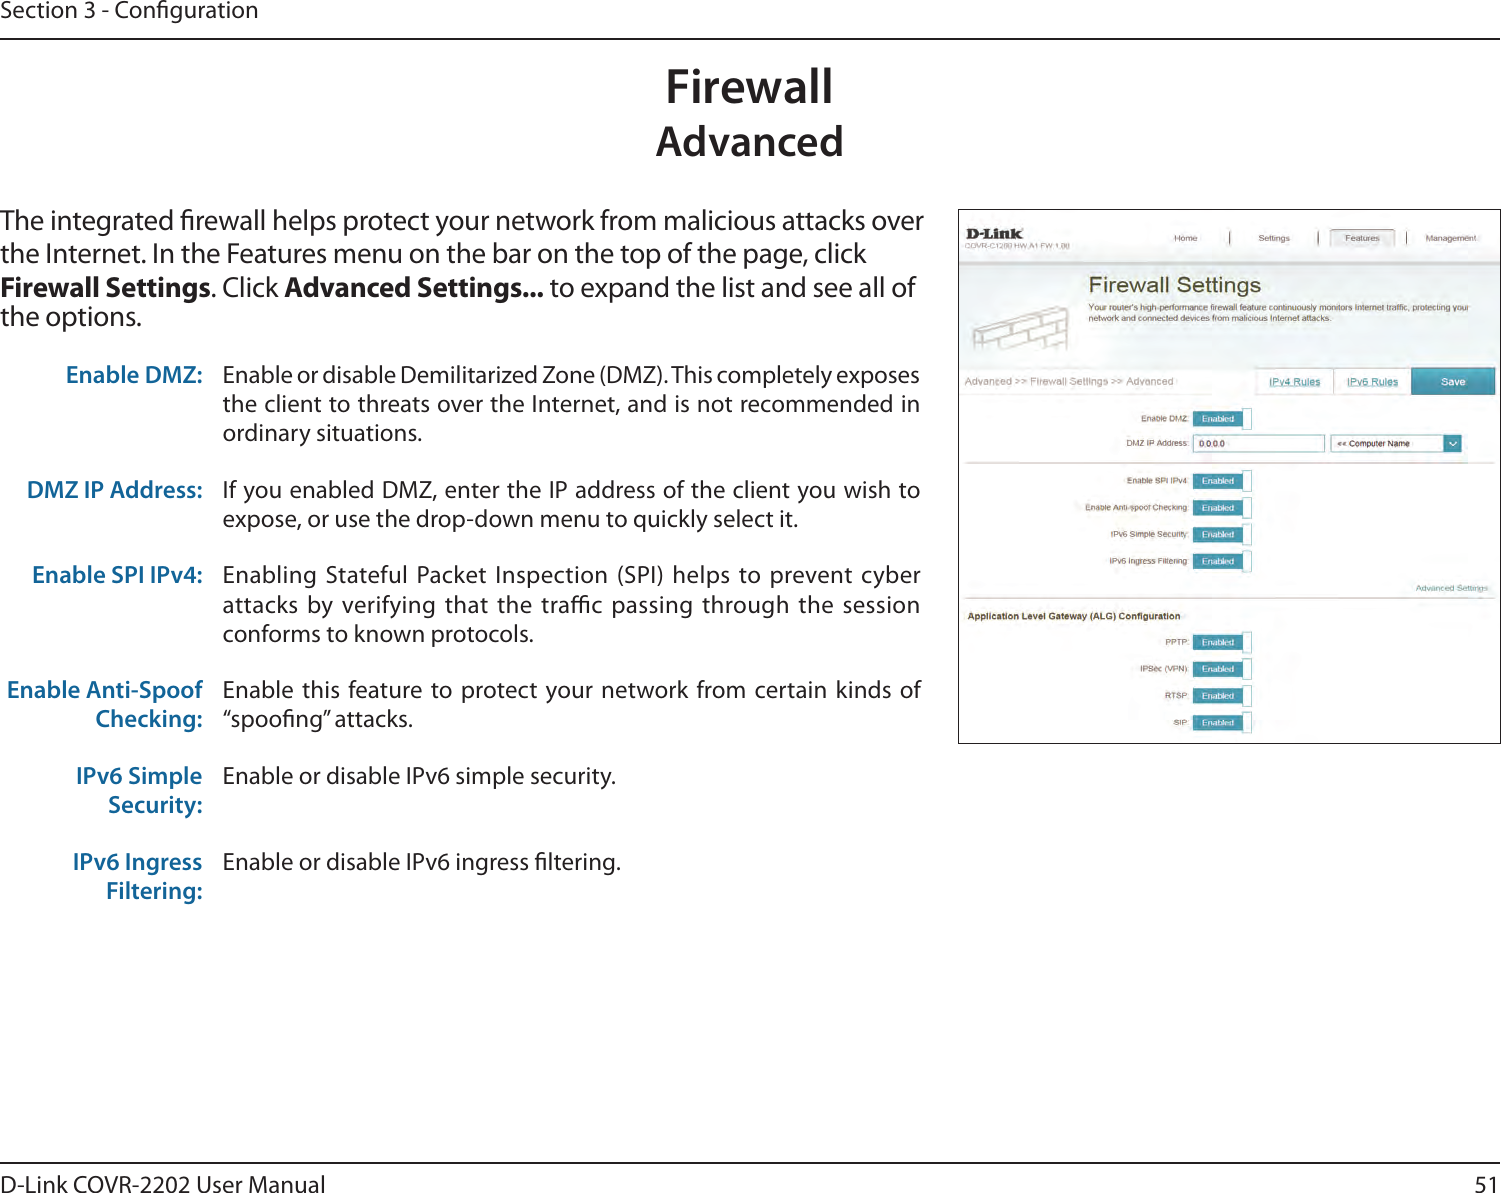 51D-Link COVR-2202 User ManualSection 3 - CongurationFirewallAdvancedThe integrated rewall helps protect your network from malicious attacks over the Internet. In the Features menu on the bar on the top of the page, click Firewall Settings. Click Advanced Settings... to expand the list and see all of the options. Enable DMZ: Enable or disable Demilitarized Zone (DMZ). This completely exposes the client to threats over the Internet, and is not recommended in ordinary situations.DMZ IP Address: If you enabled DMZ, enter the IP address of the client you wish to expose, or use the drop-down menu to quickly select it.Enable SPI IPv4: Enabling Stateful Packet Inspection (SPI) helps to prevent cyber attacks by verifying that the trac passing through the session conforms to known protocols.Enable Anti-Spoof Checking:Enable this feature to protect your network from certain kinds of “spoong” attacks.IPv6 Simple Security:Enable or disable IPv6 simple security.IPv6 Ingress Filtering:Enable or disable IPv6 ingress ltering.